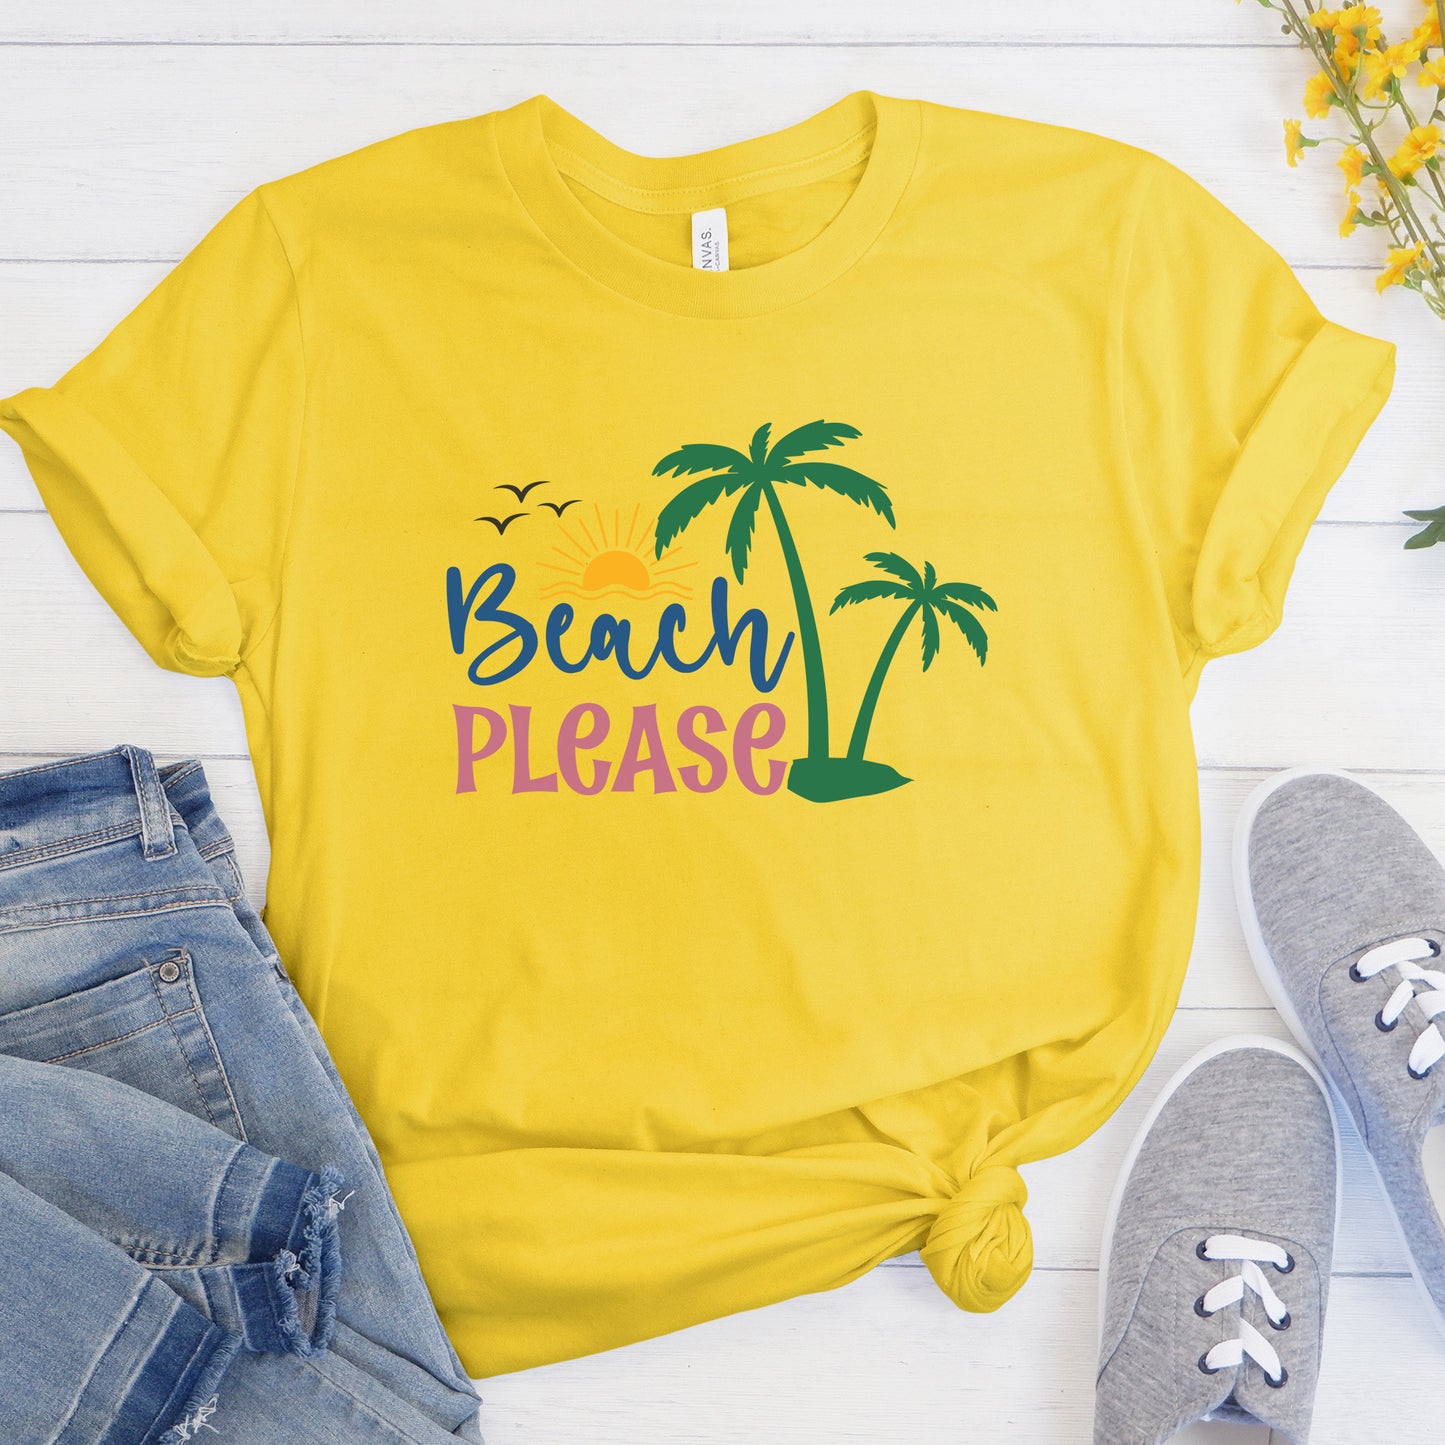 "Beach Please" With Foot Prints Graphic